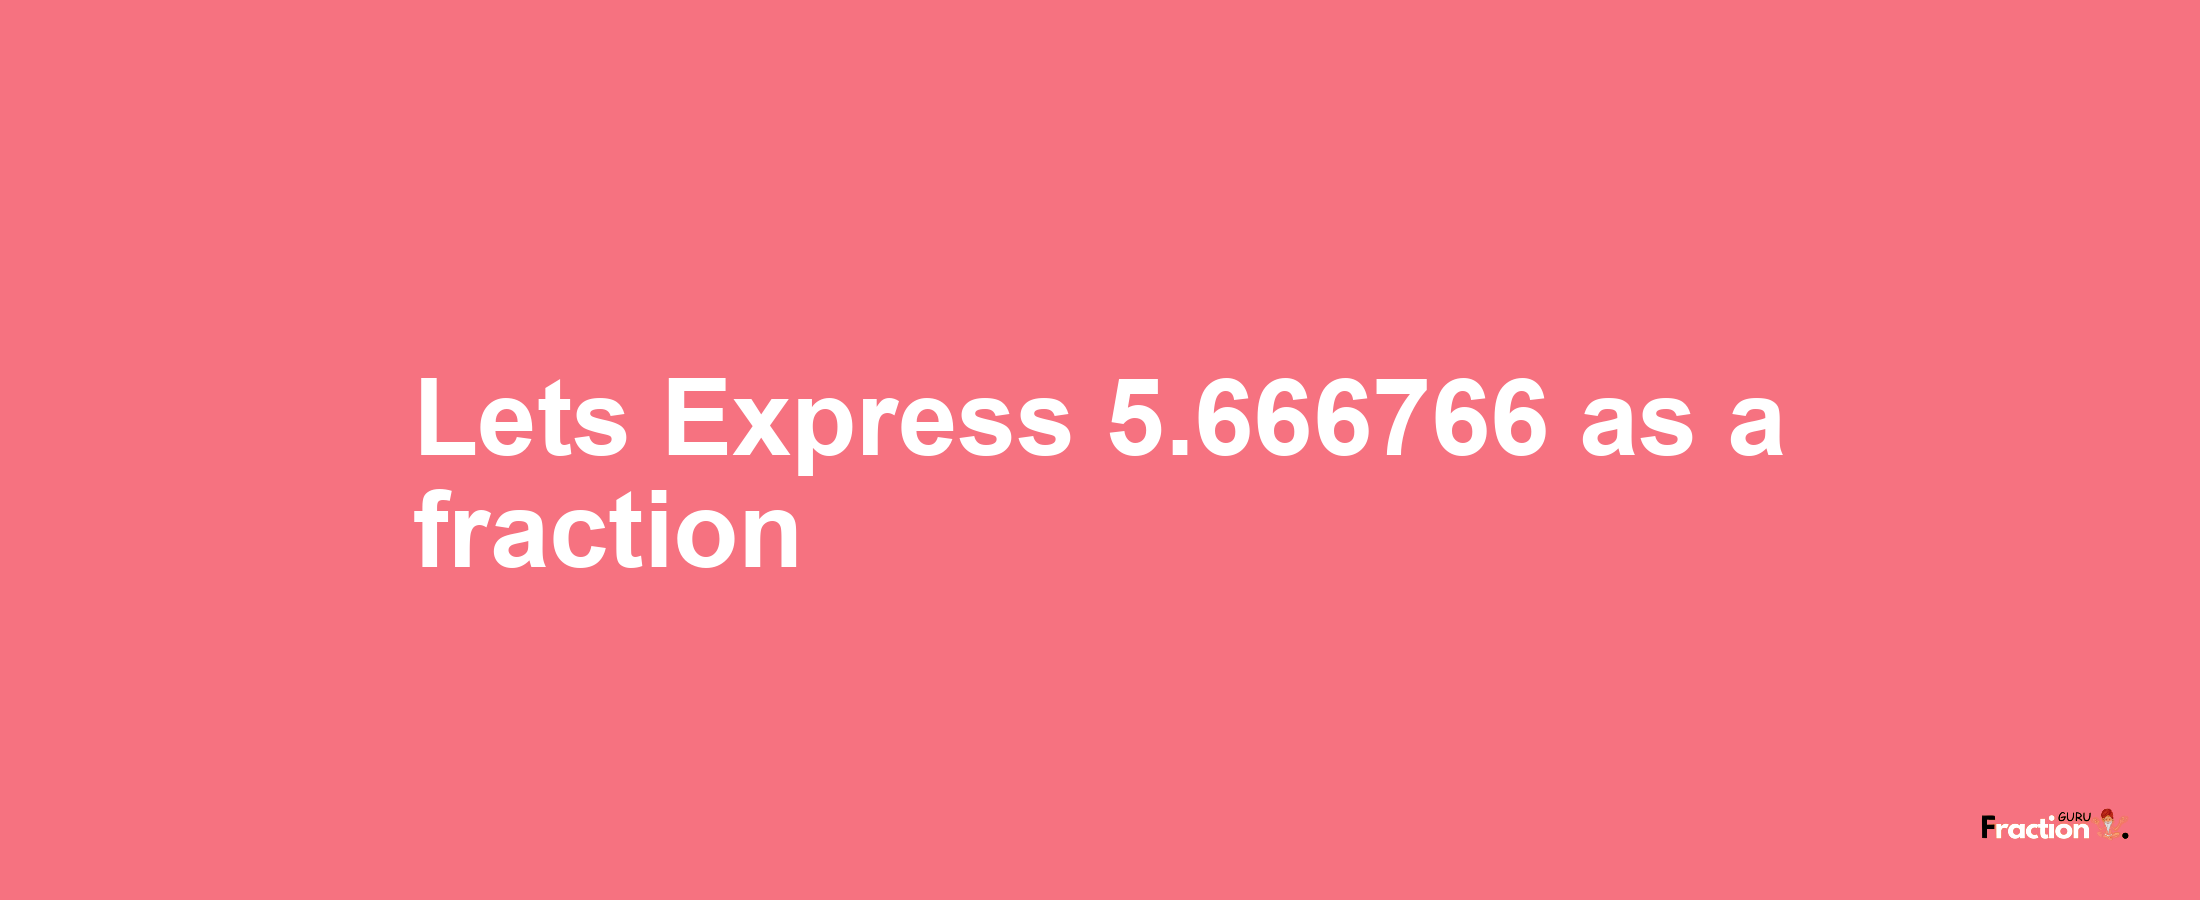 Lets Express 5.666766 as afraction